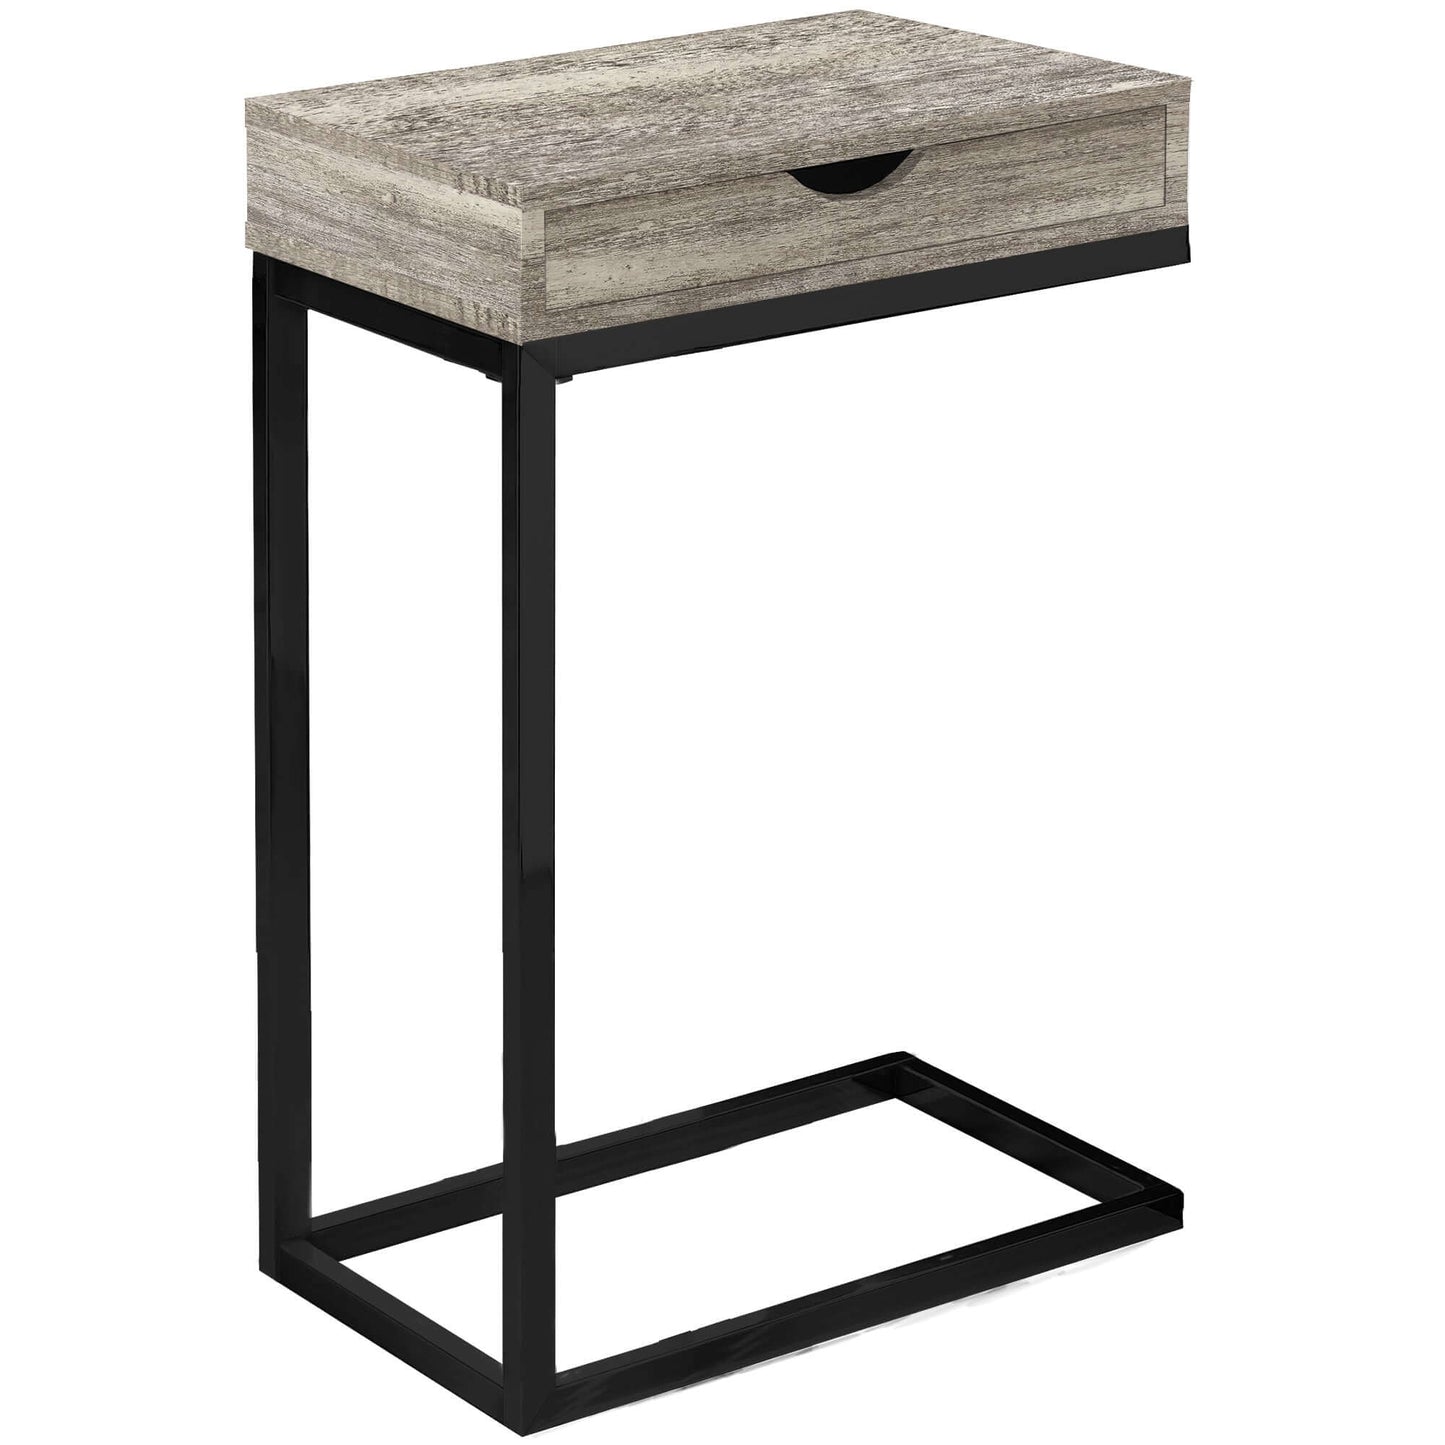 16" L / 25" H Modern C-Style Metal Bedroom End Table with Wood Top